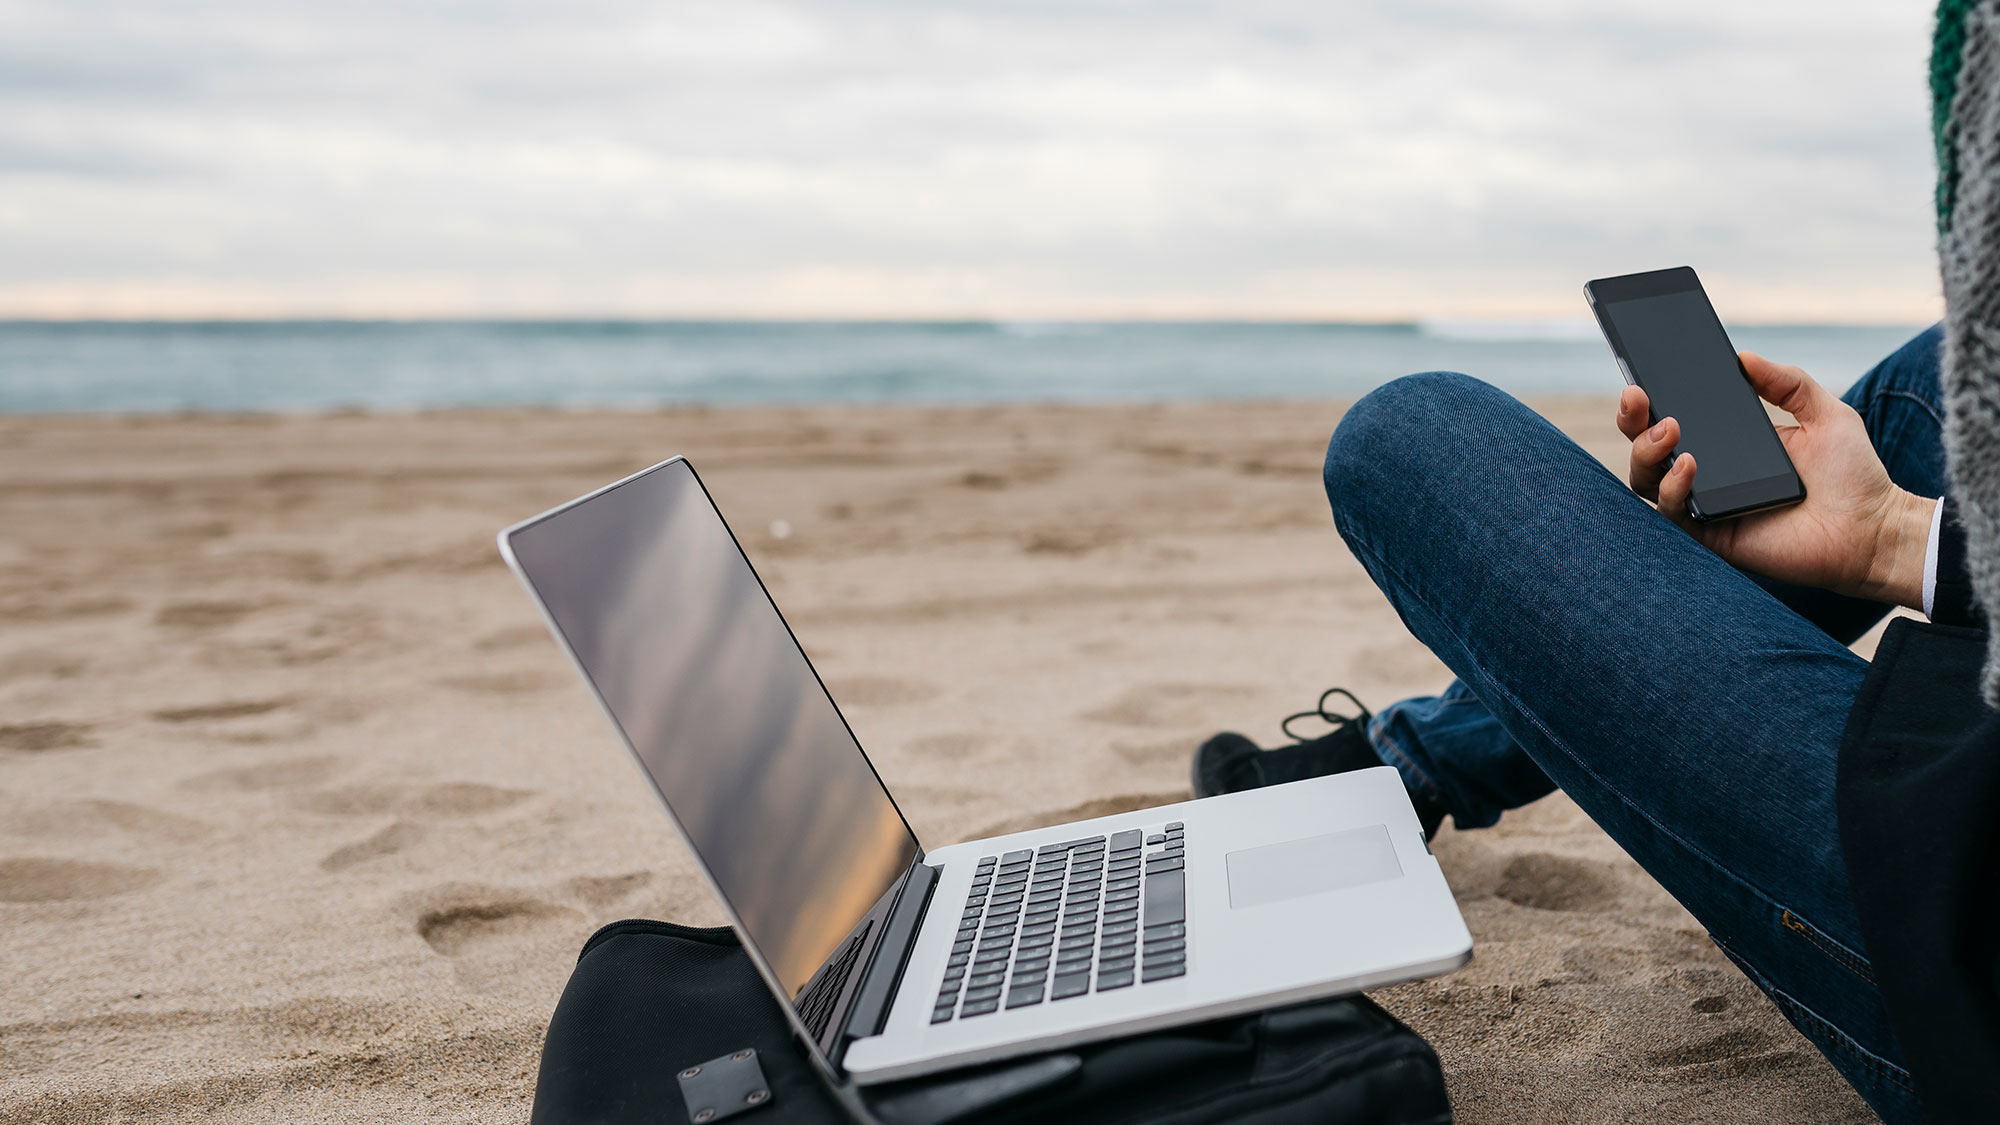 Person sitting on the beach with an open laptop and has a mobile device in hand. Radiation is present in many areas of the everyday life.